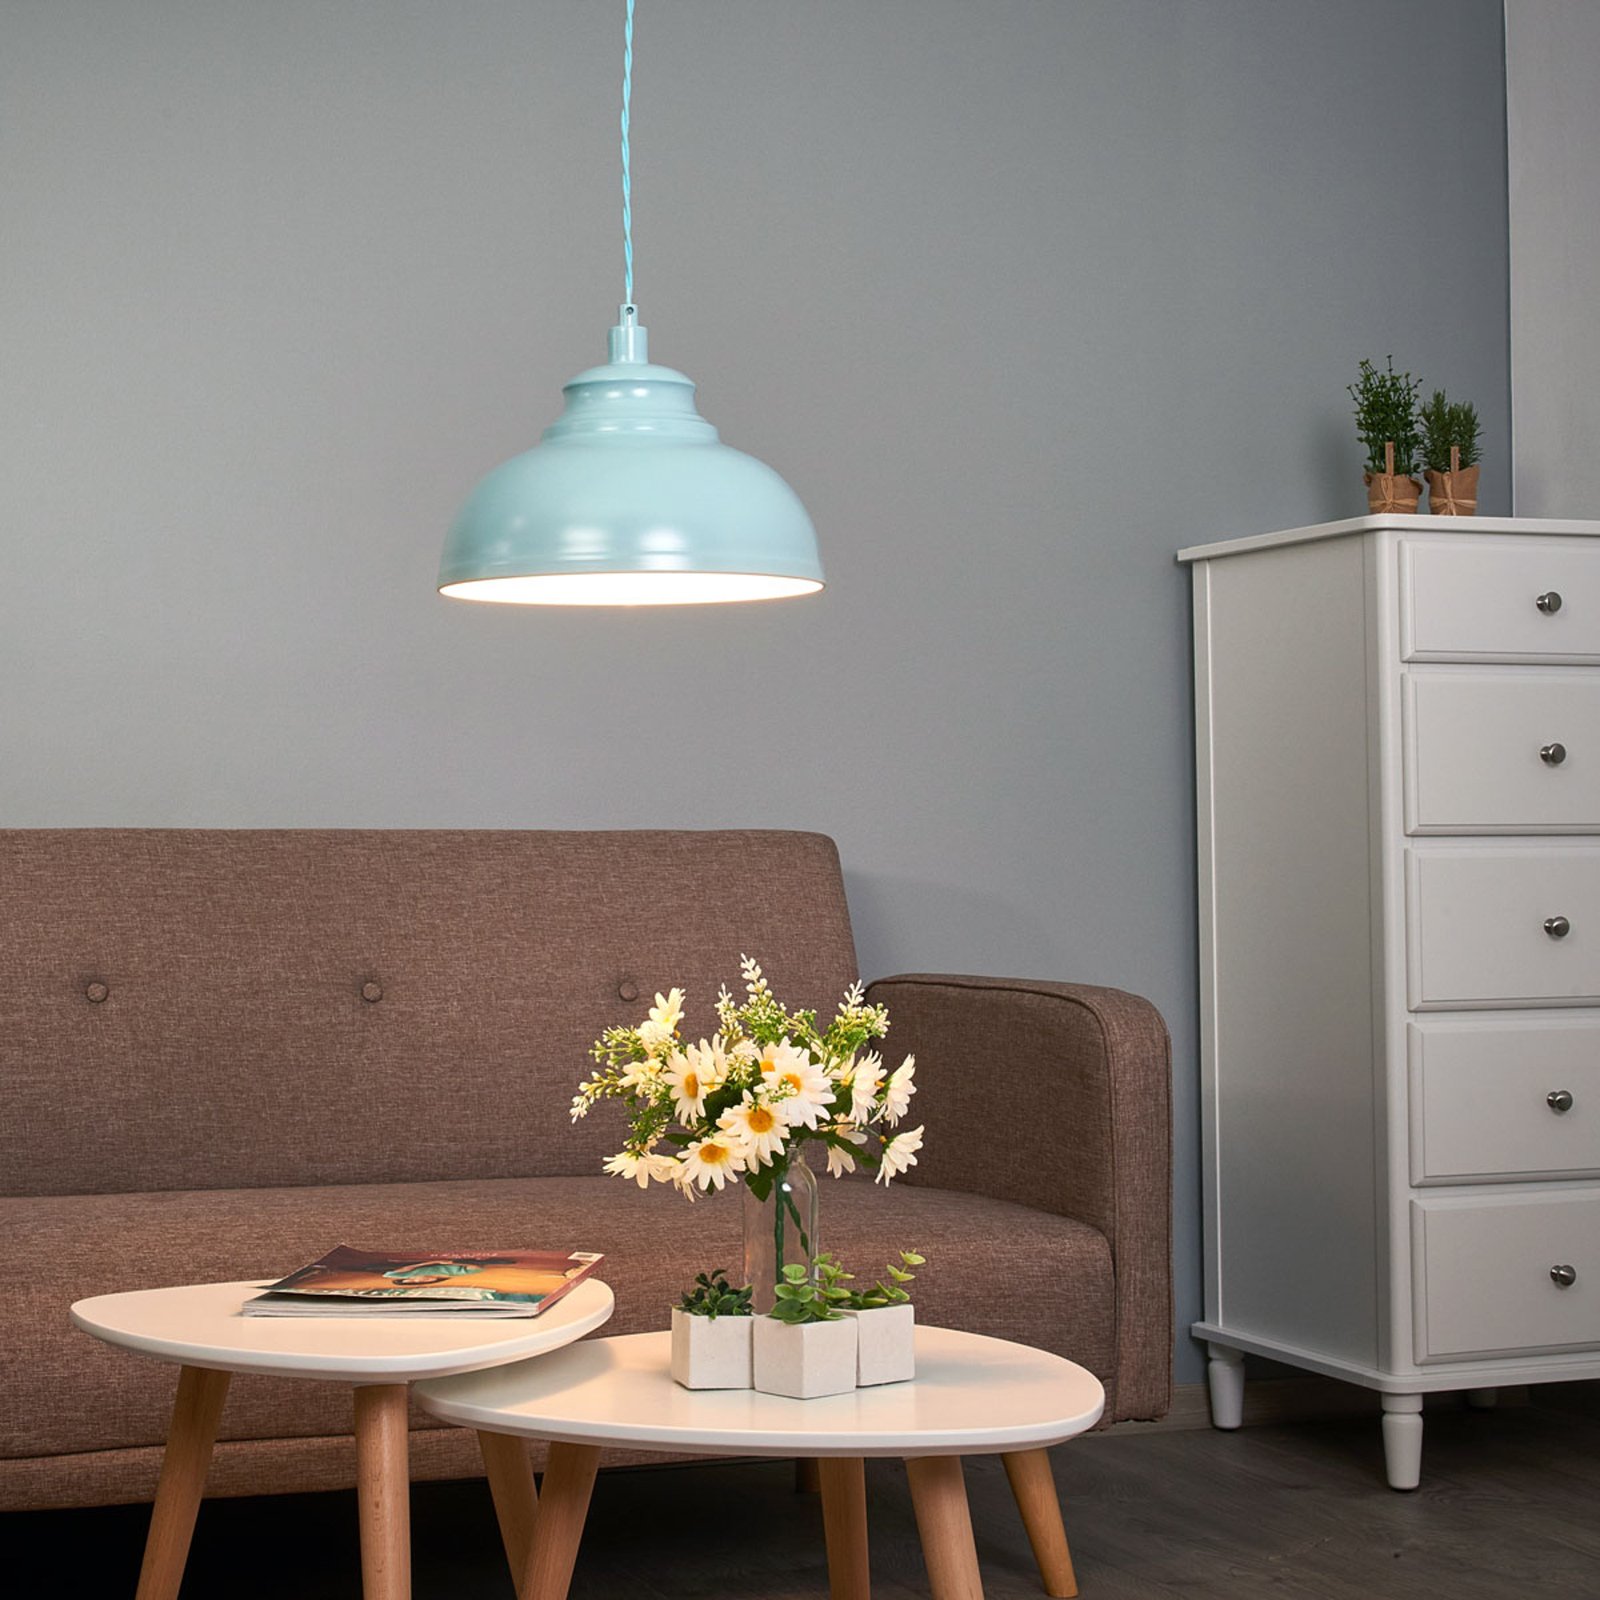 Isla - a hanging light in a soft blue colour